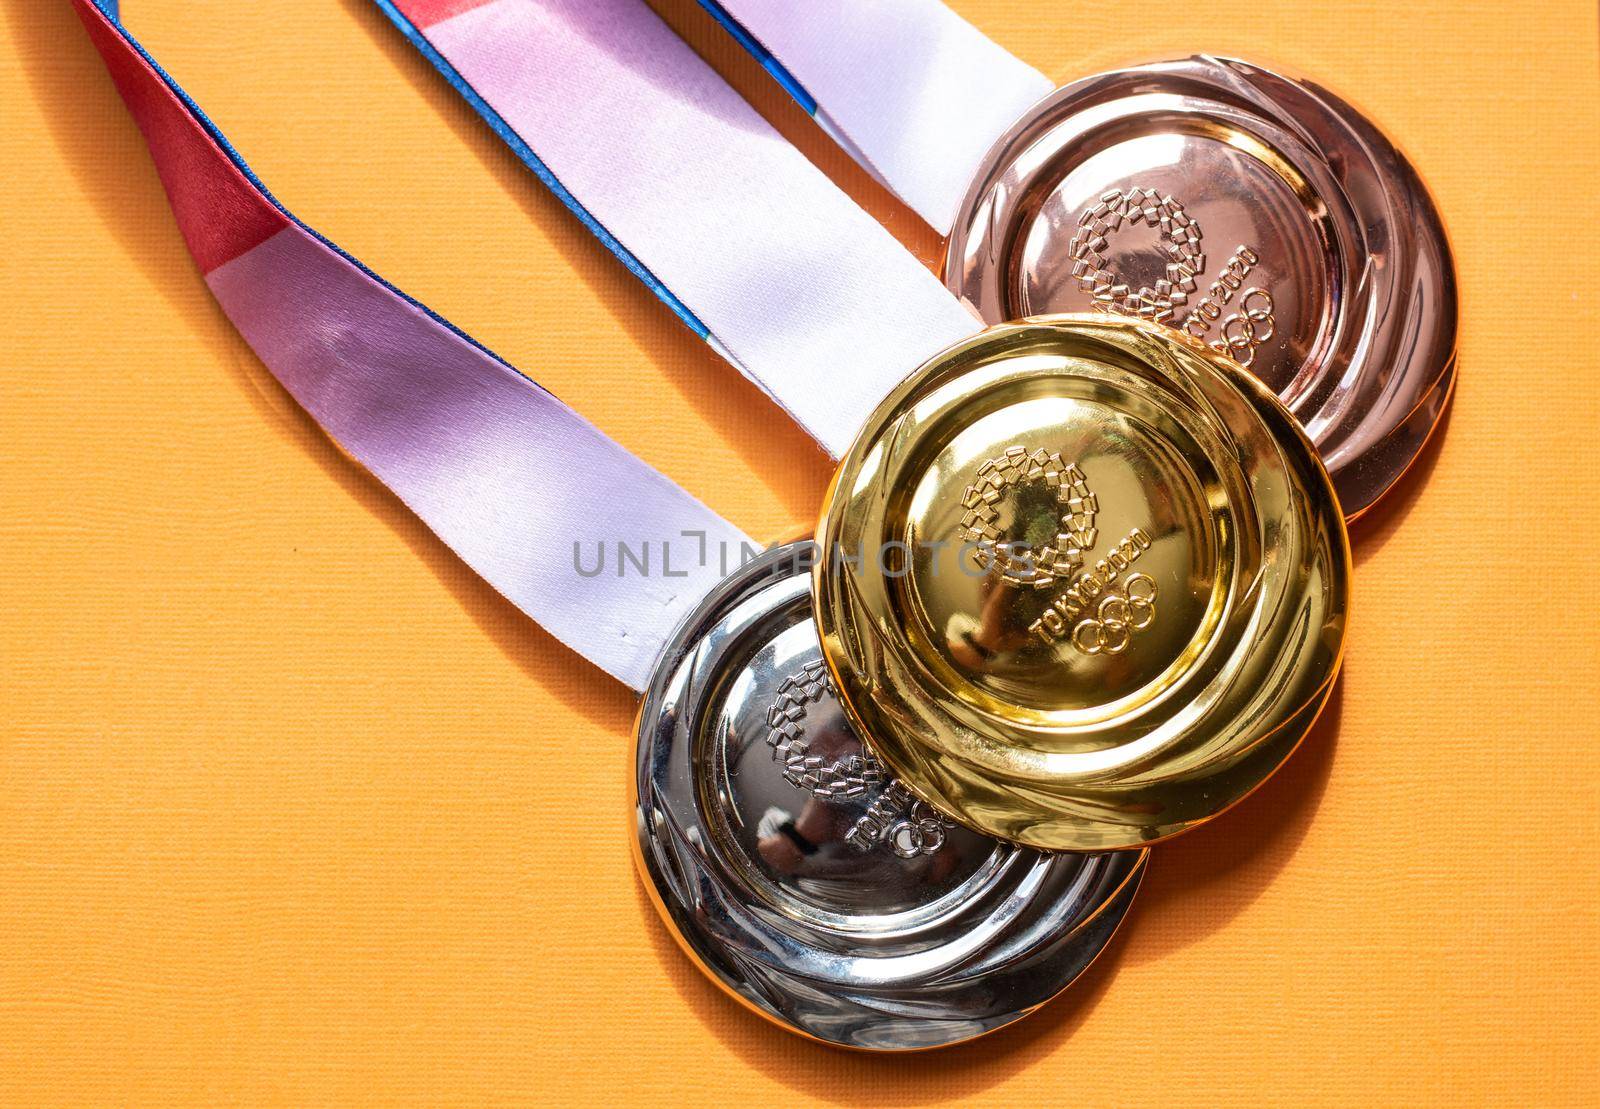 April 25, 2021 Tokyo, Japan. Gold, silver and bronze medals of the XXXII Summer Olympic Games in Tokyo on a yellow background.